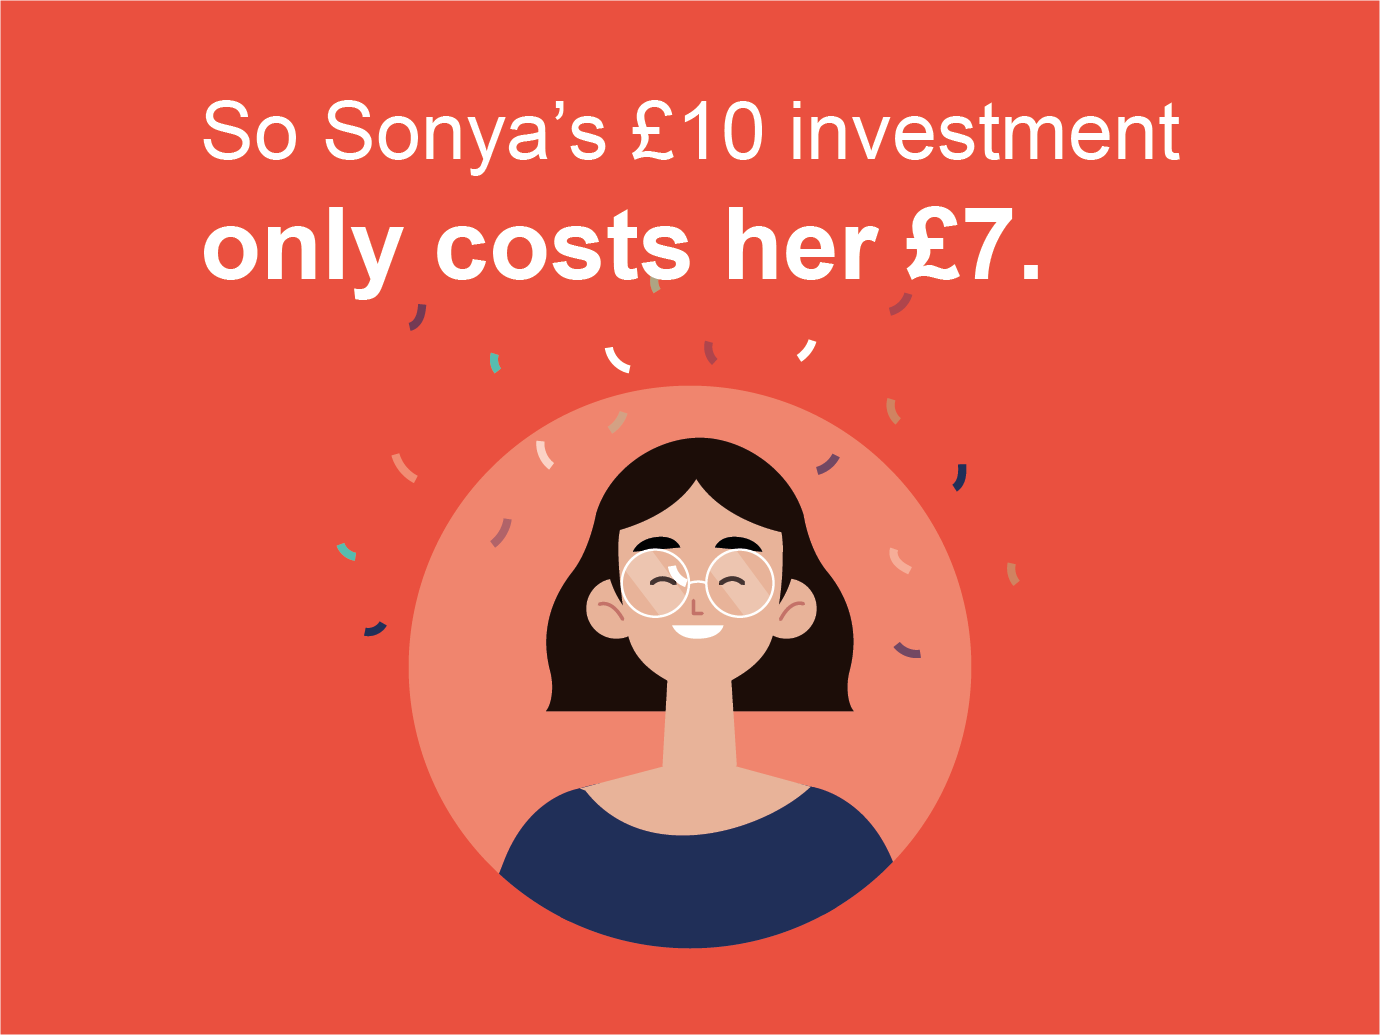 So Sonya's £10 investment only costs her £7.